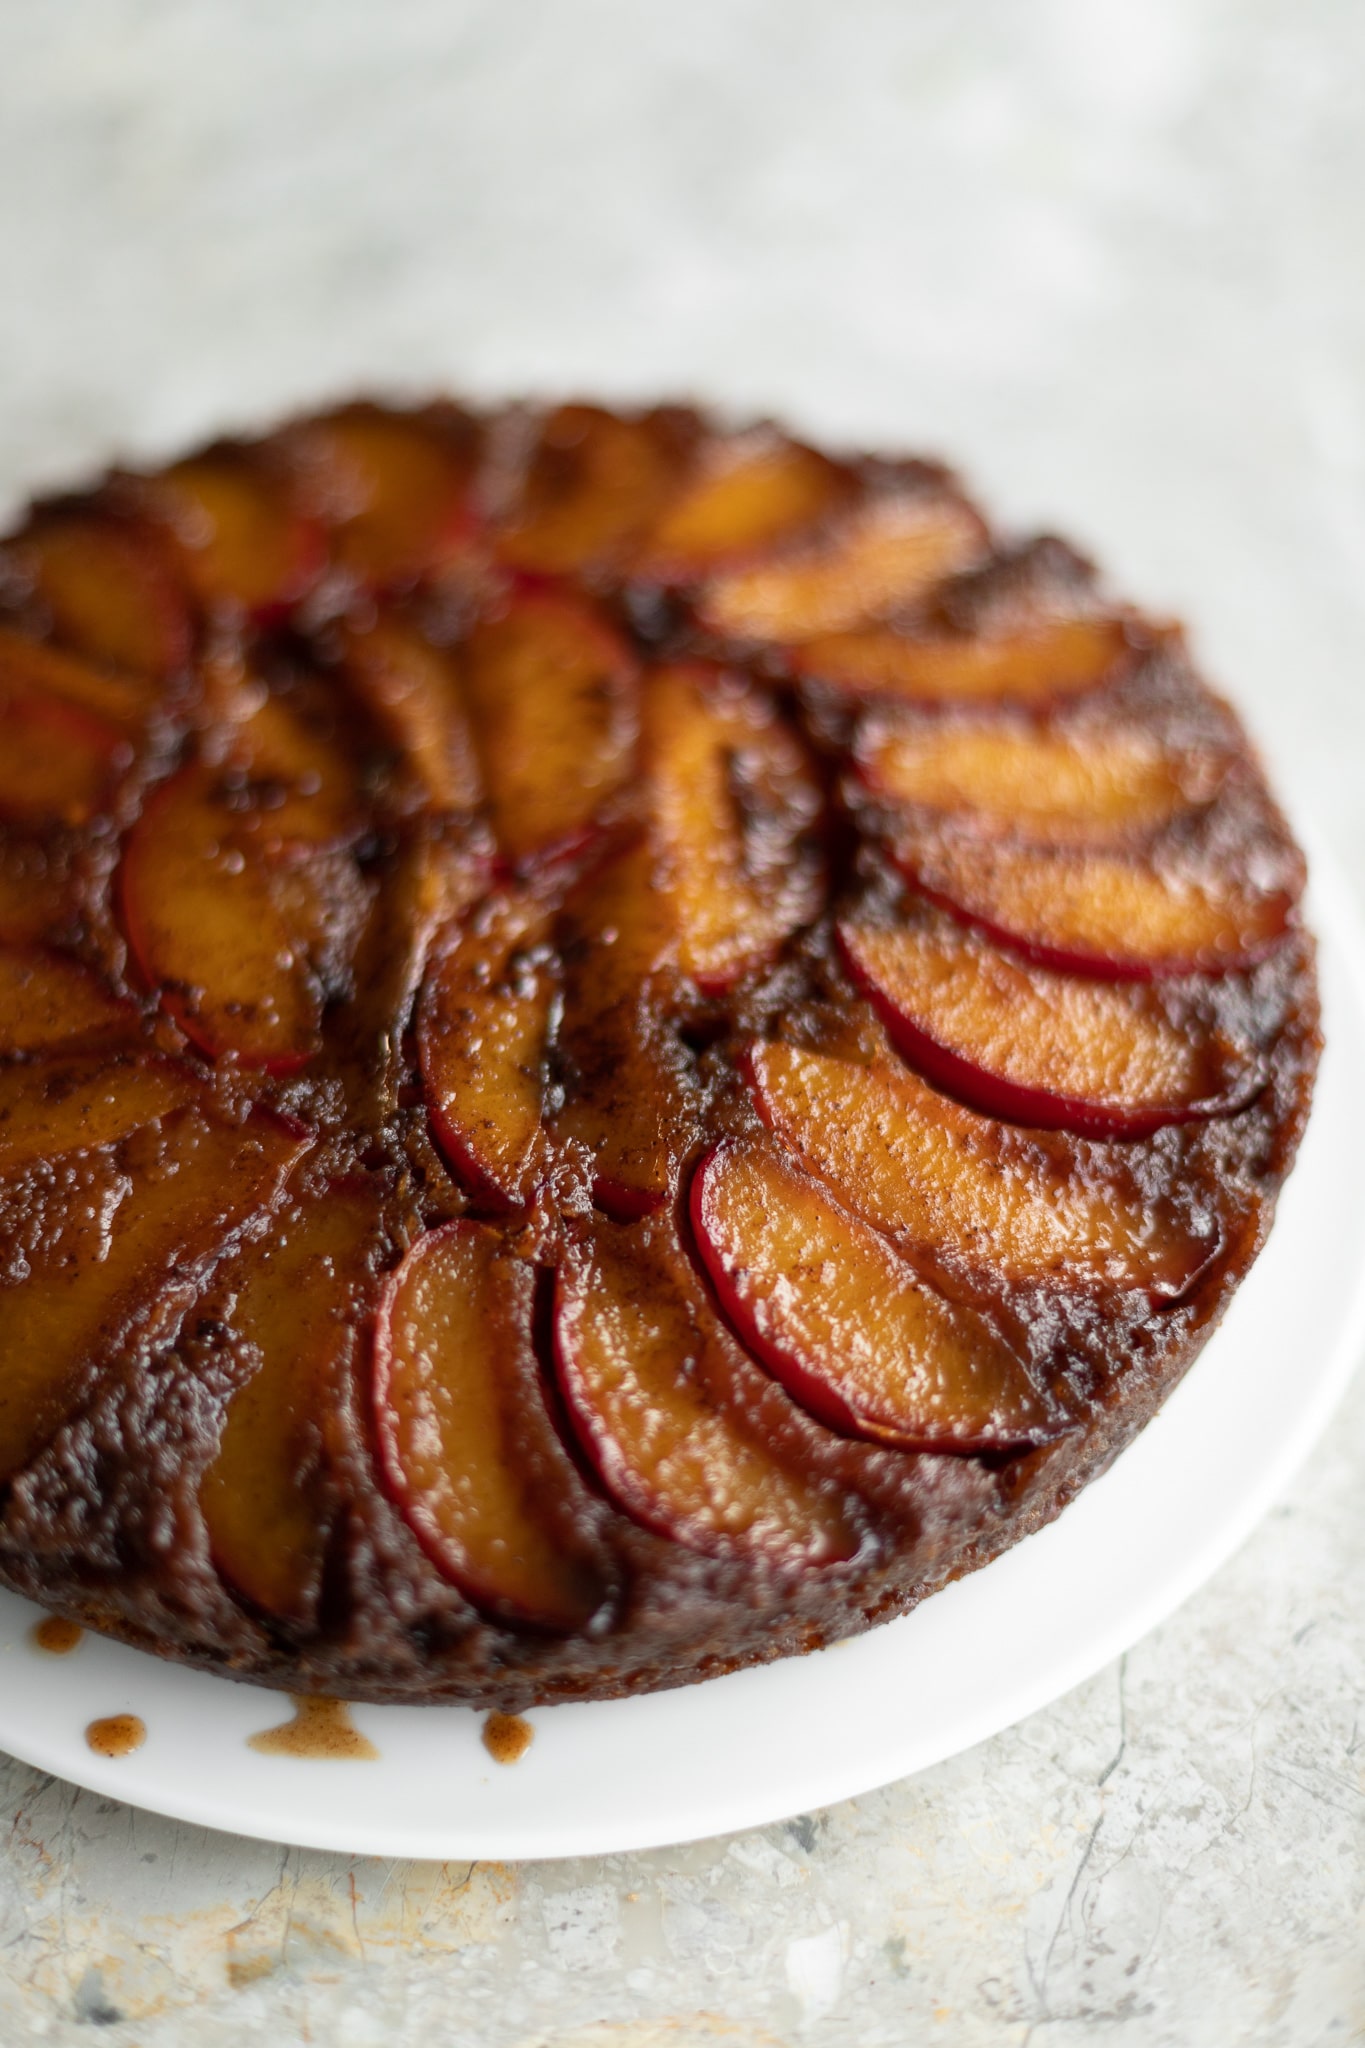 plum upside down cake, shot from the side